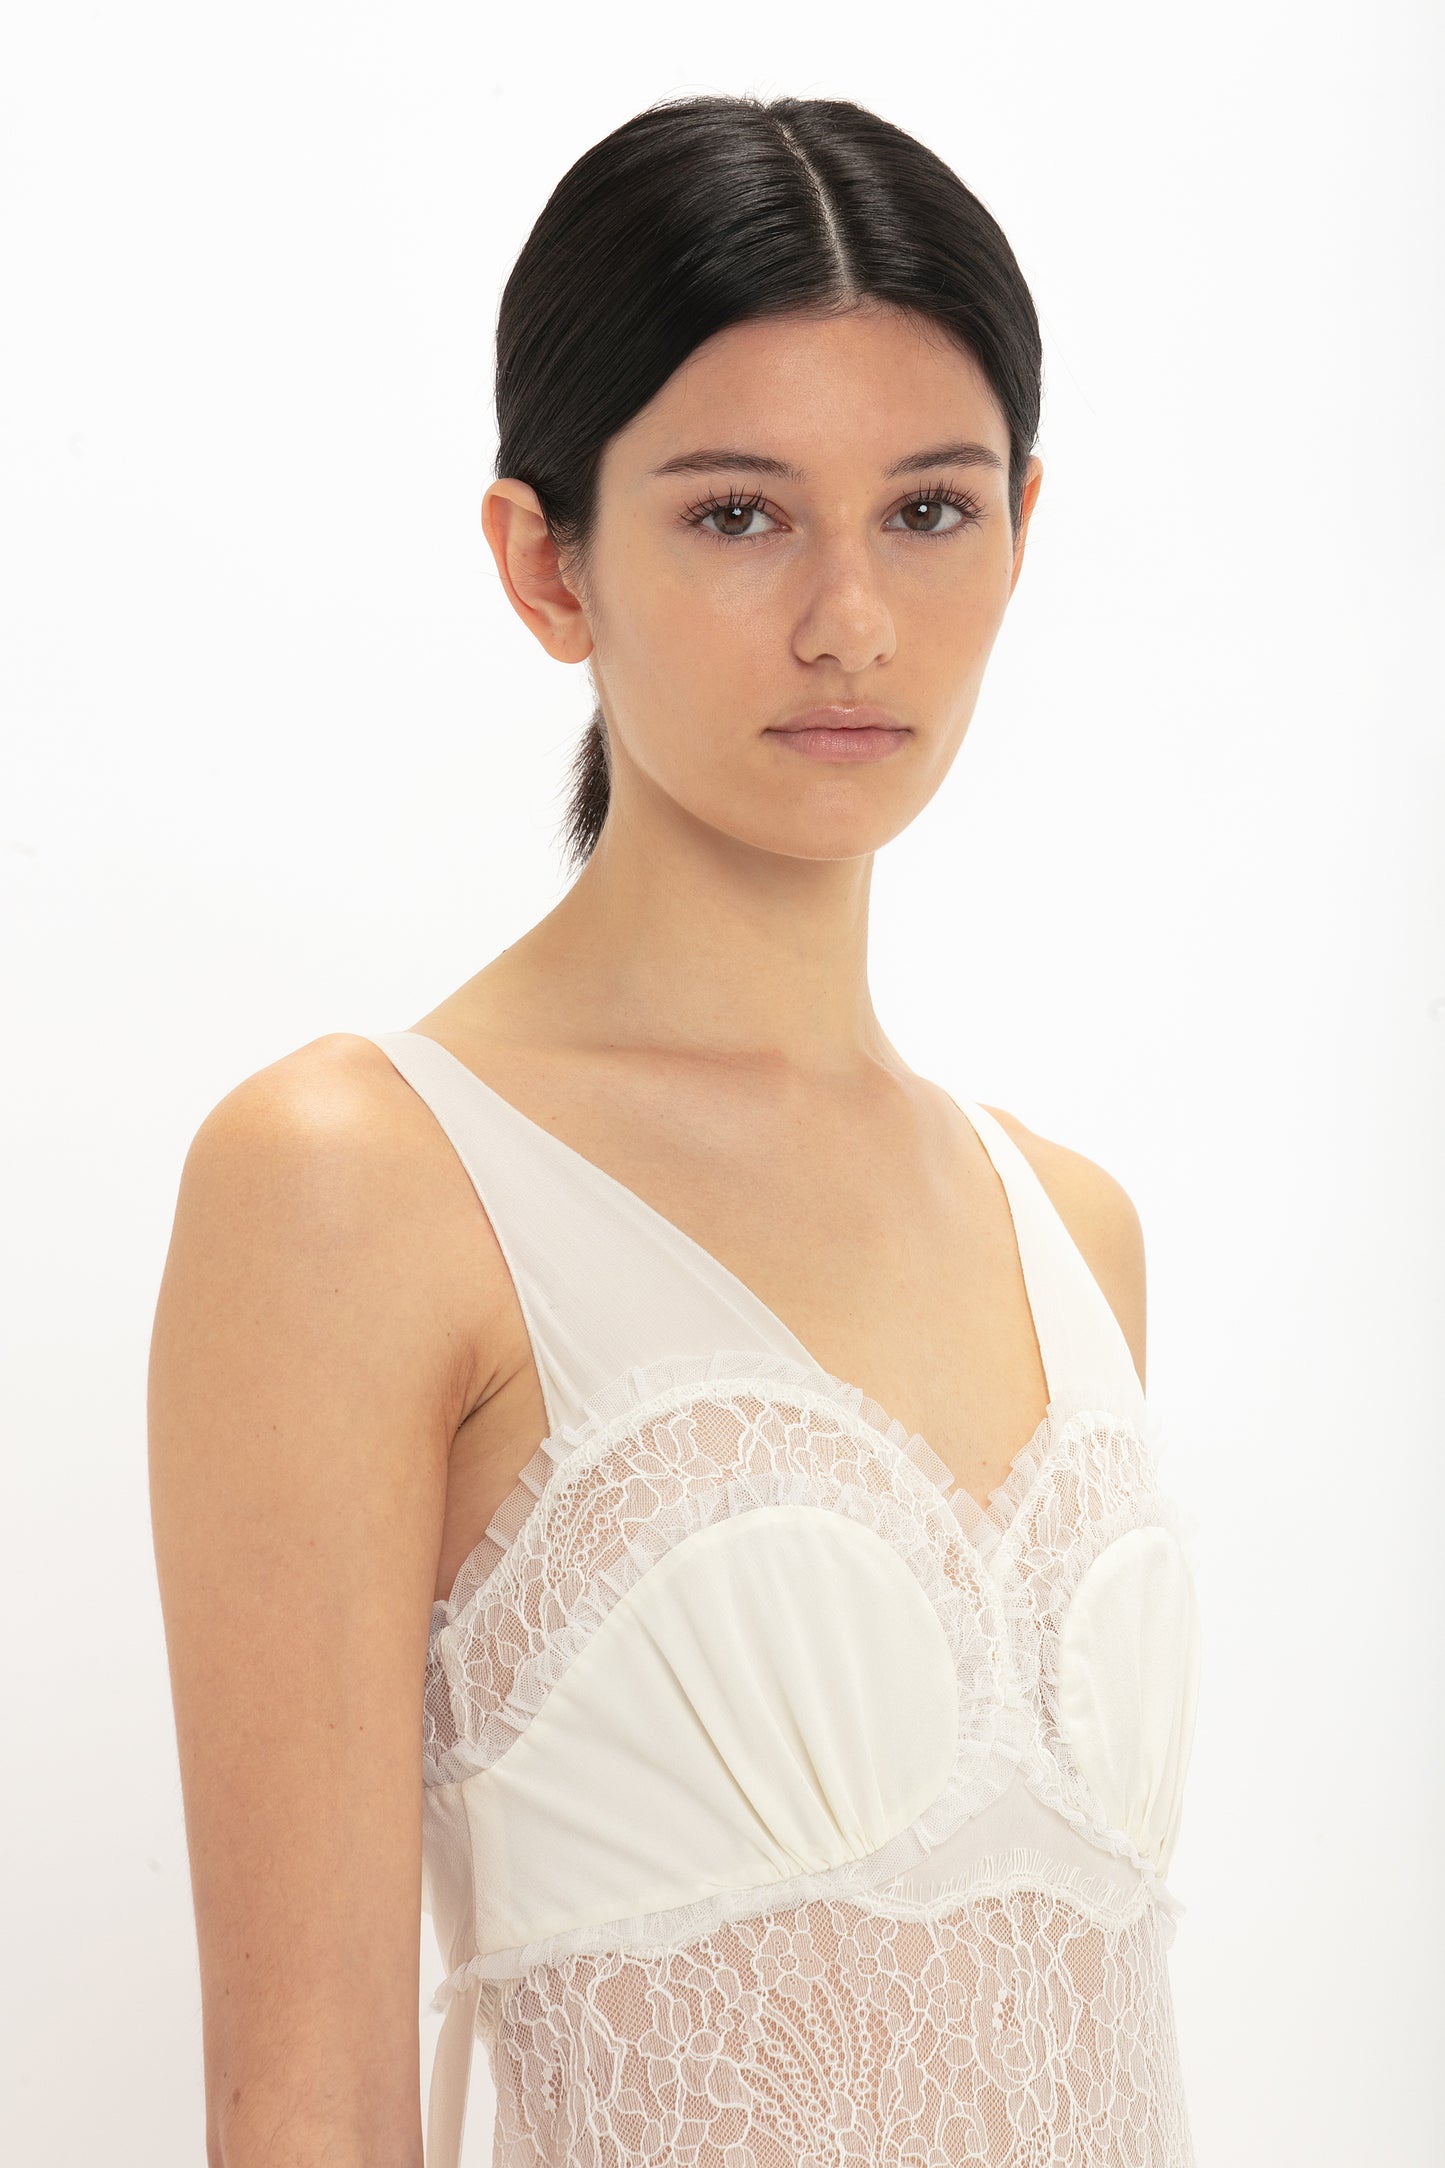 A person with dark hair is wearing a Victoria Beckham Ruffle Detail Midi Dress In Ivory, looking towards the camera against a plain white background.